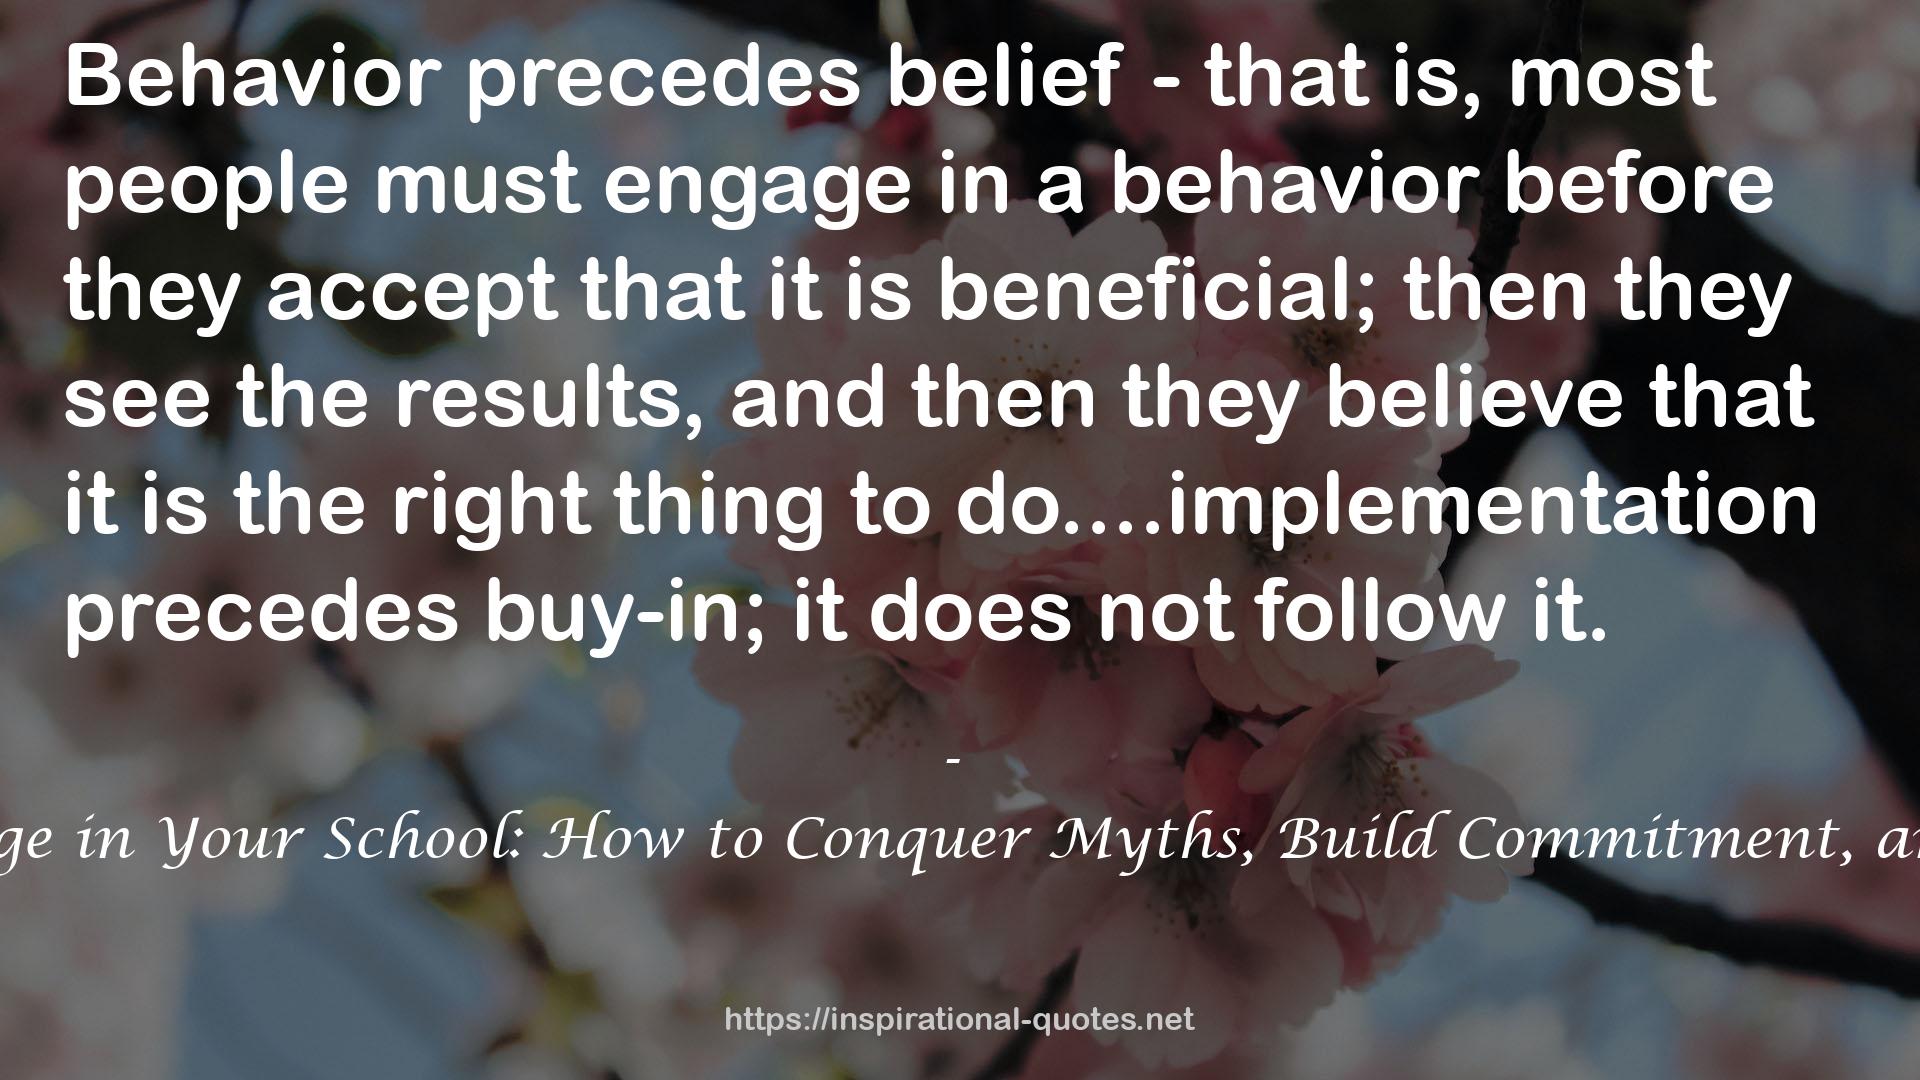 Leading Change in Your School: How to Conquer Myths, Build Commitment, and Get Results QUOTES